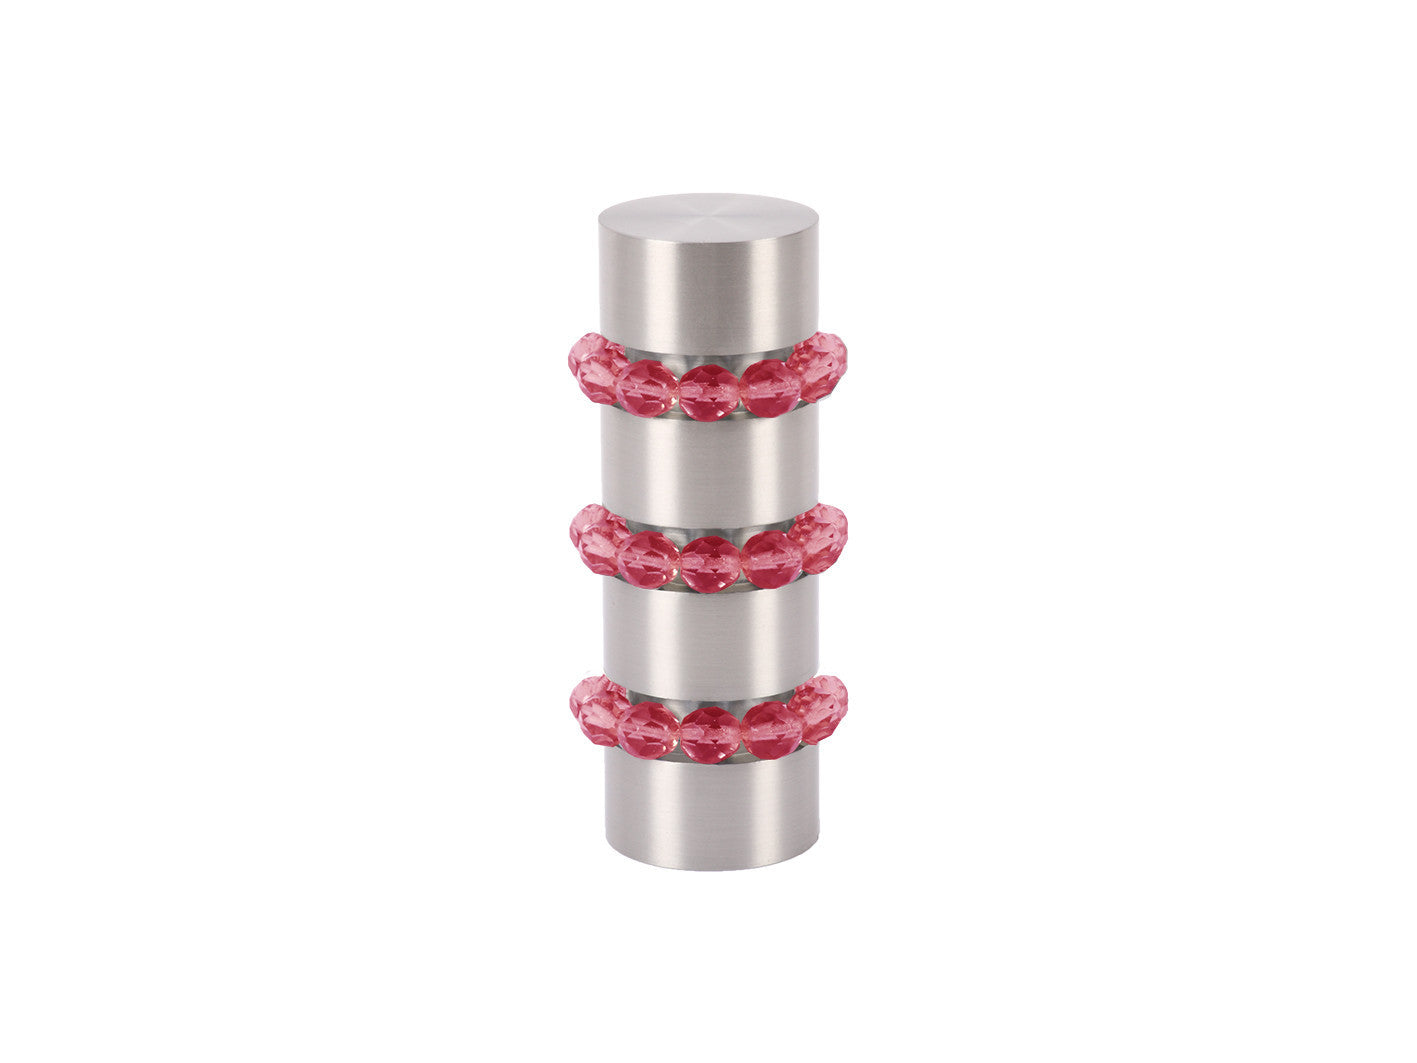 Beaded stainless steel curtain pole finial in cranberry red glass | Walcot House 19mm collection